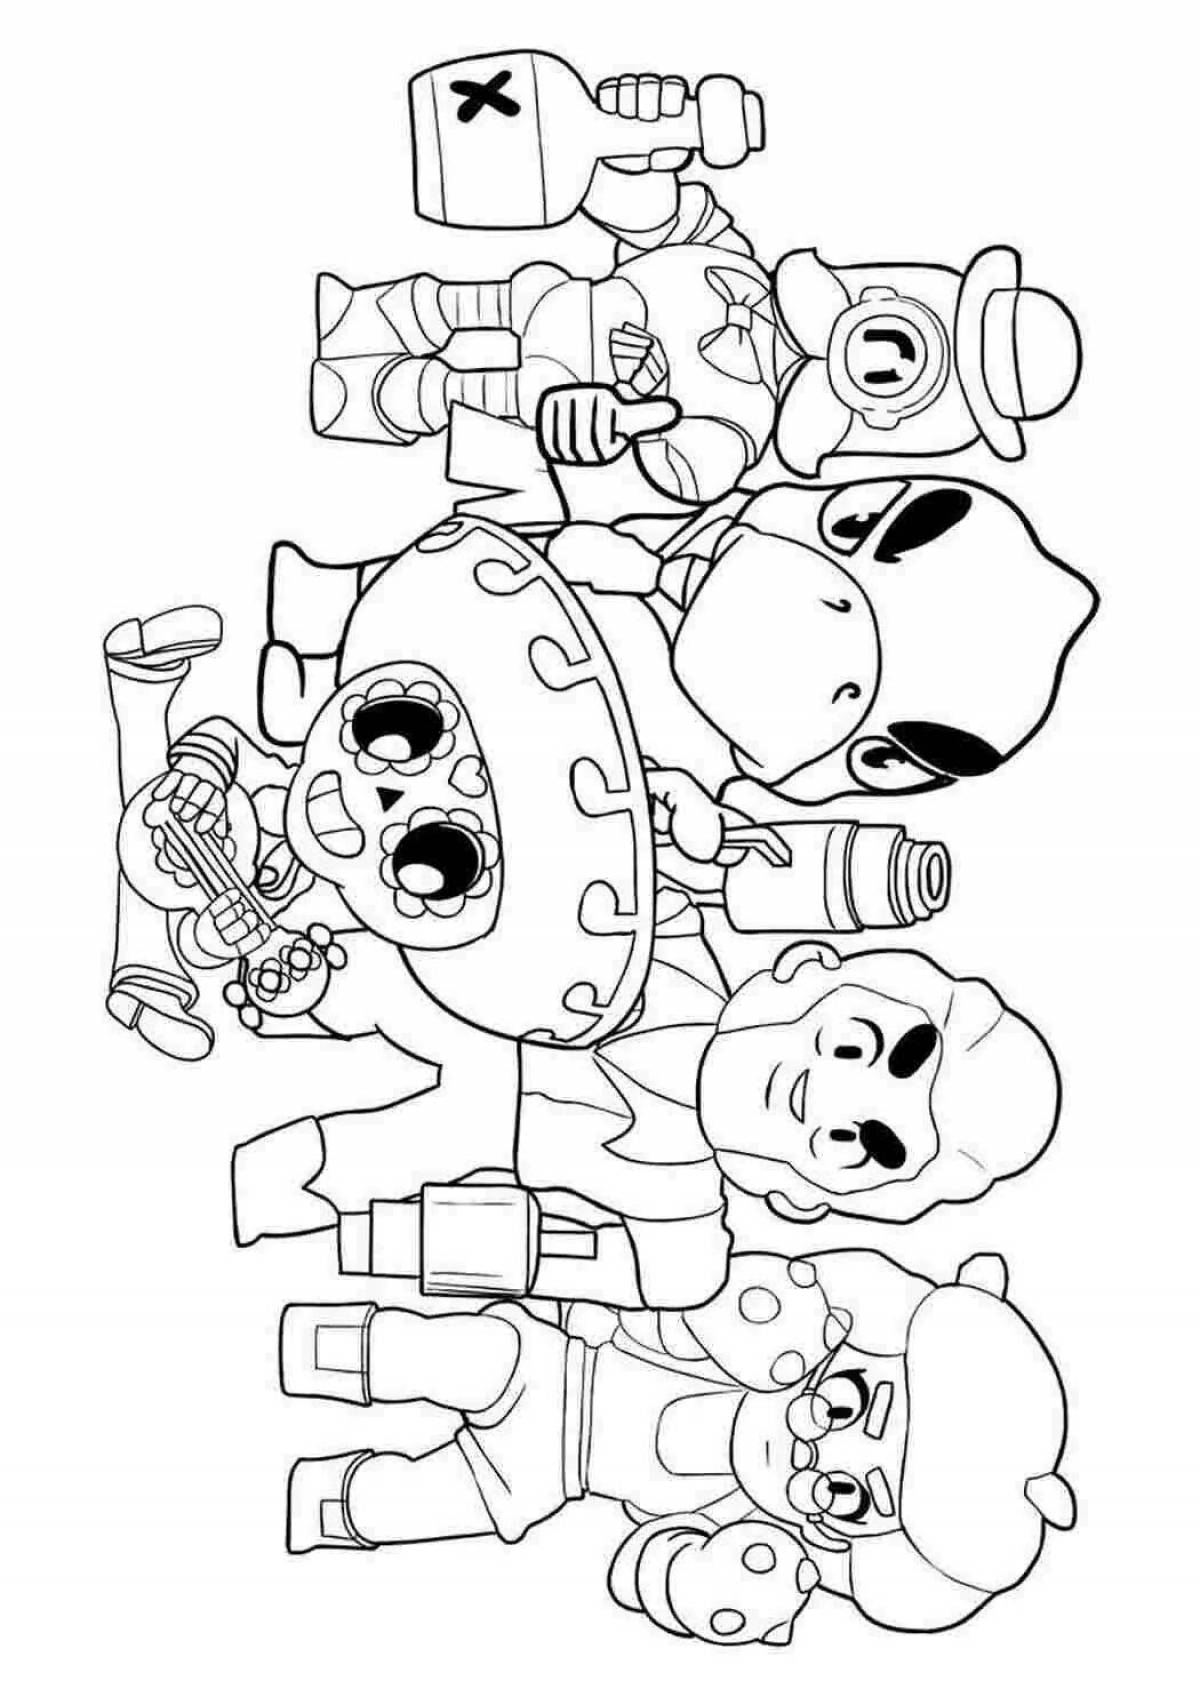 Braver stars playful coloring page for kids